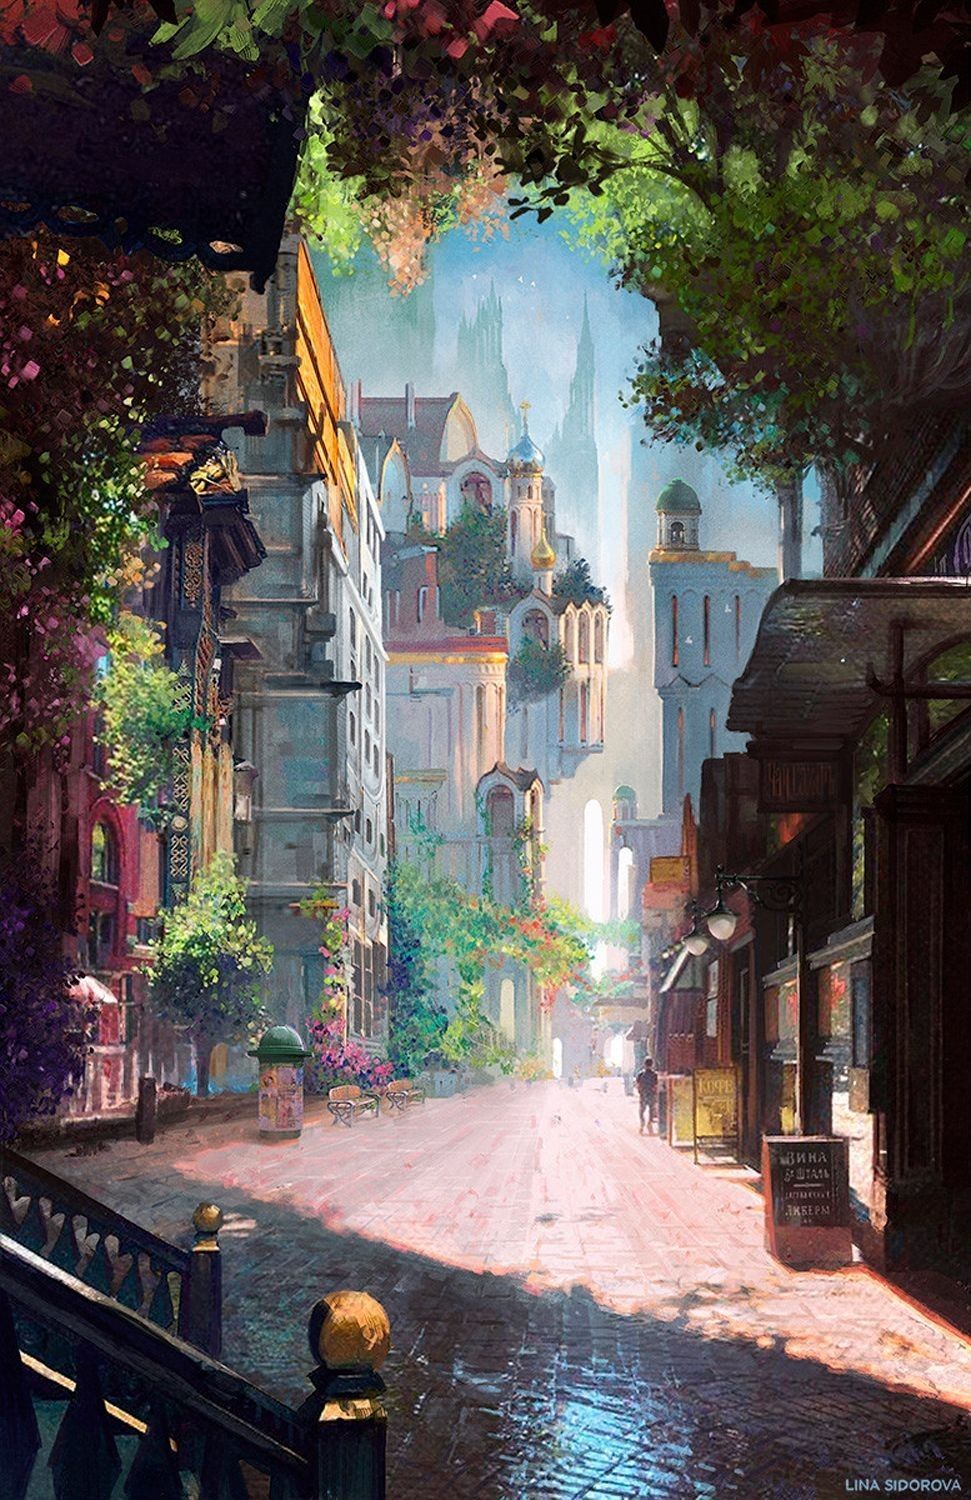 Download Scenic Japanese Anime Street Wallpaper | Wallpapers.com